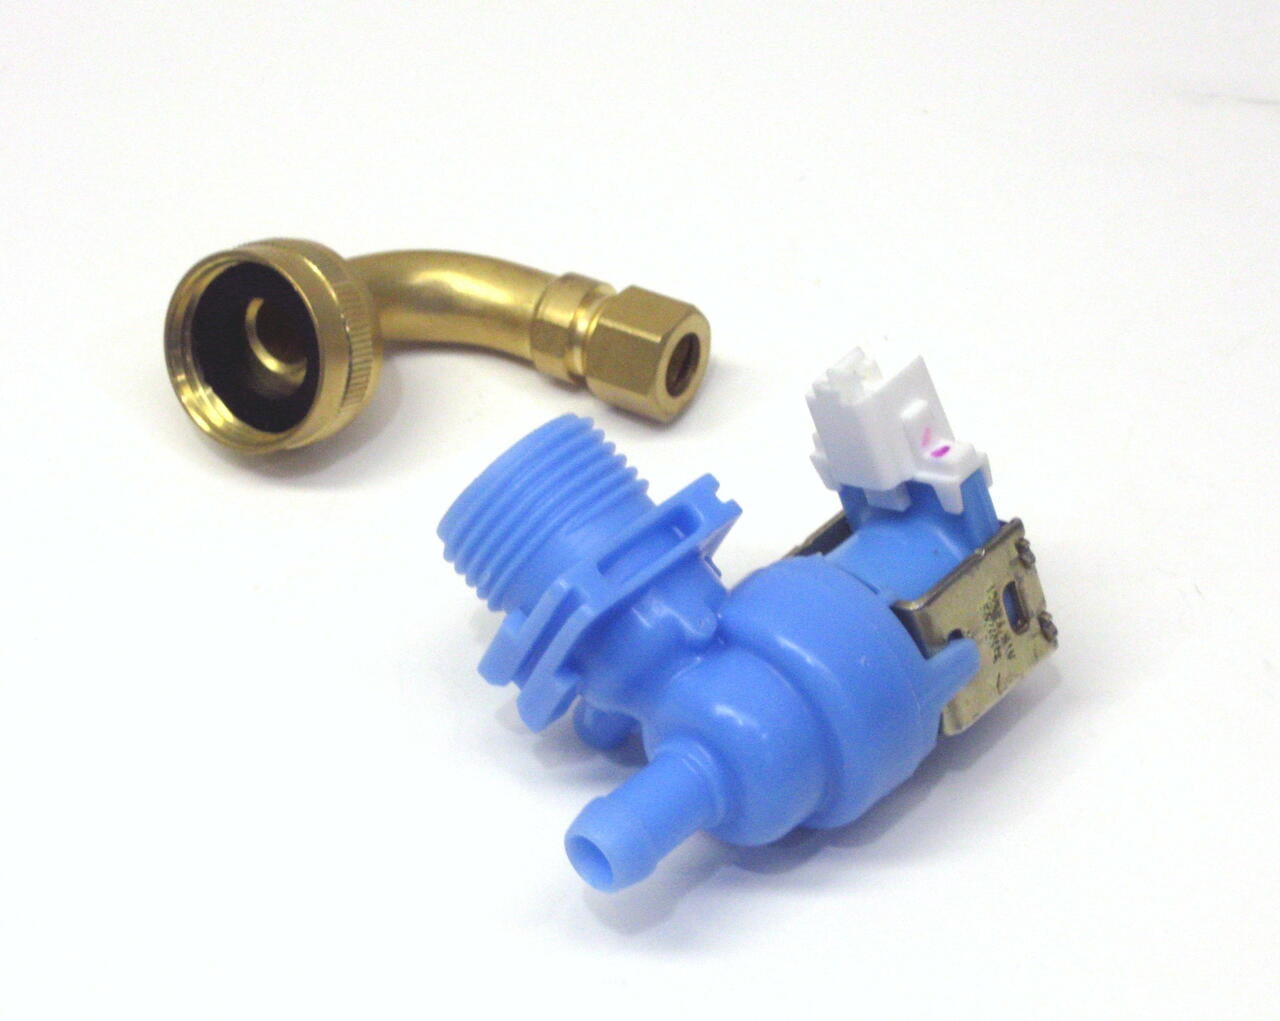 Endurance Pro W10327249 Dishwasher Inlet Water Valve Replacement for Whirlpool